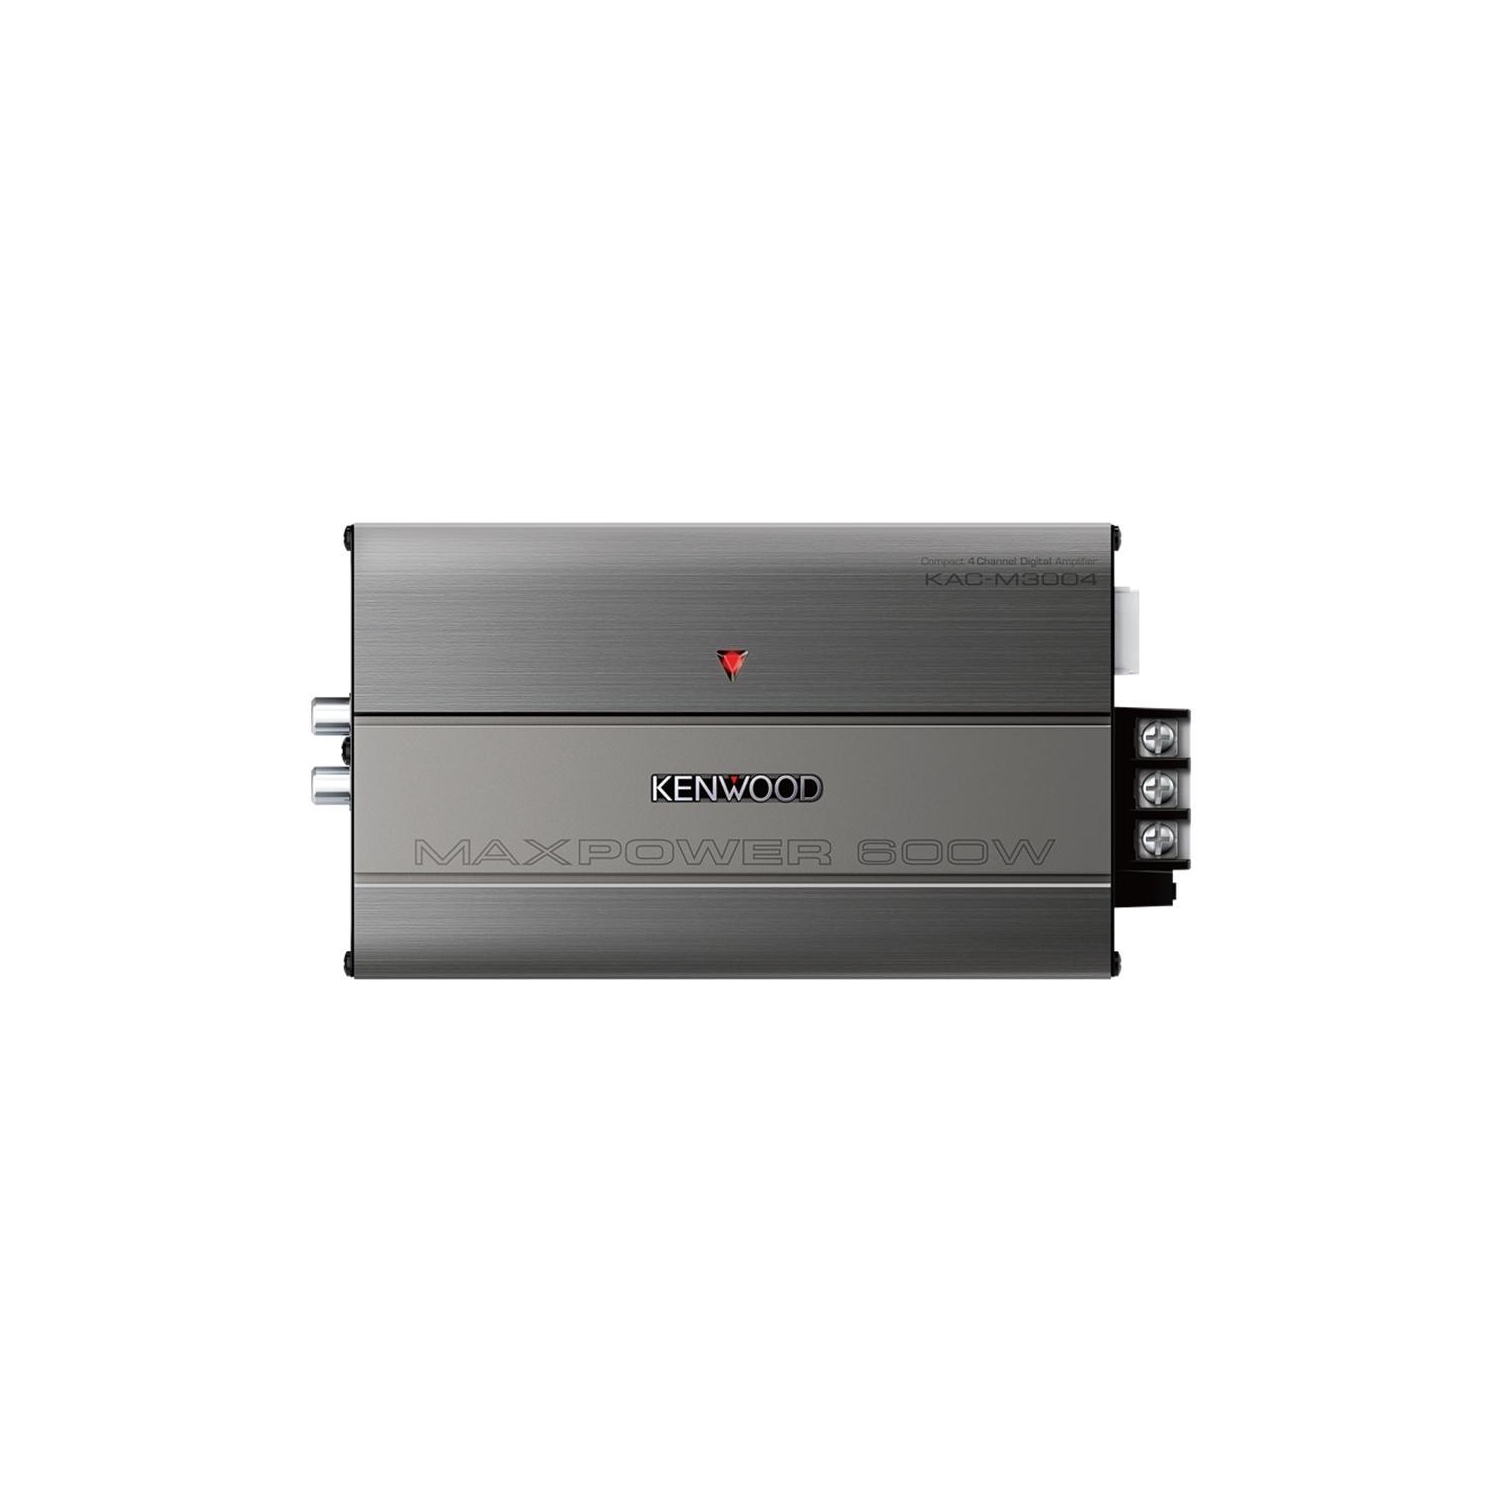 Kenwood KAC-M3004 Compact 4-channel car amplifier — 50 watts RMS x 4 at 4 Ohms